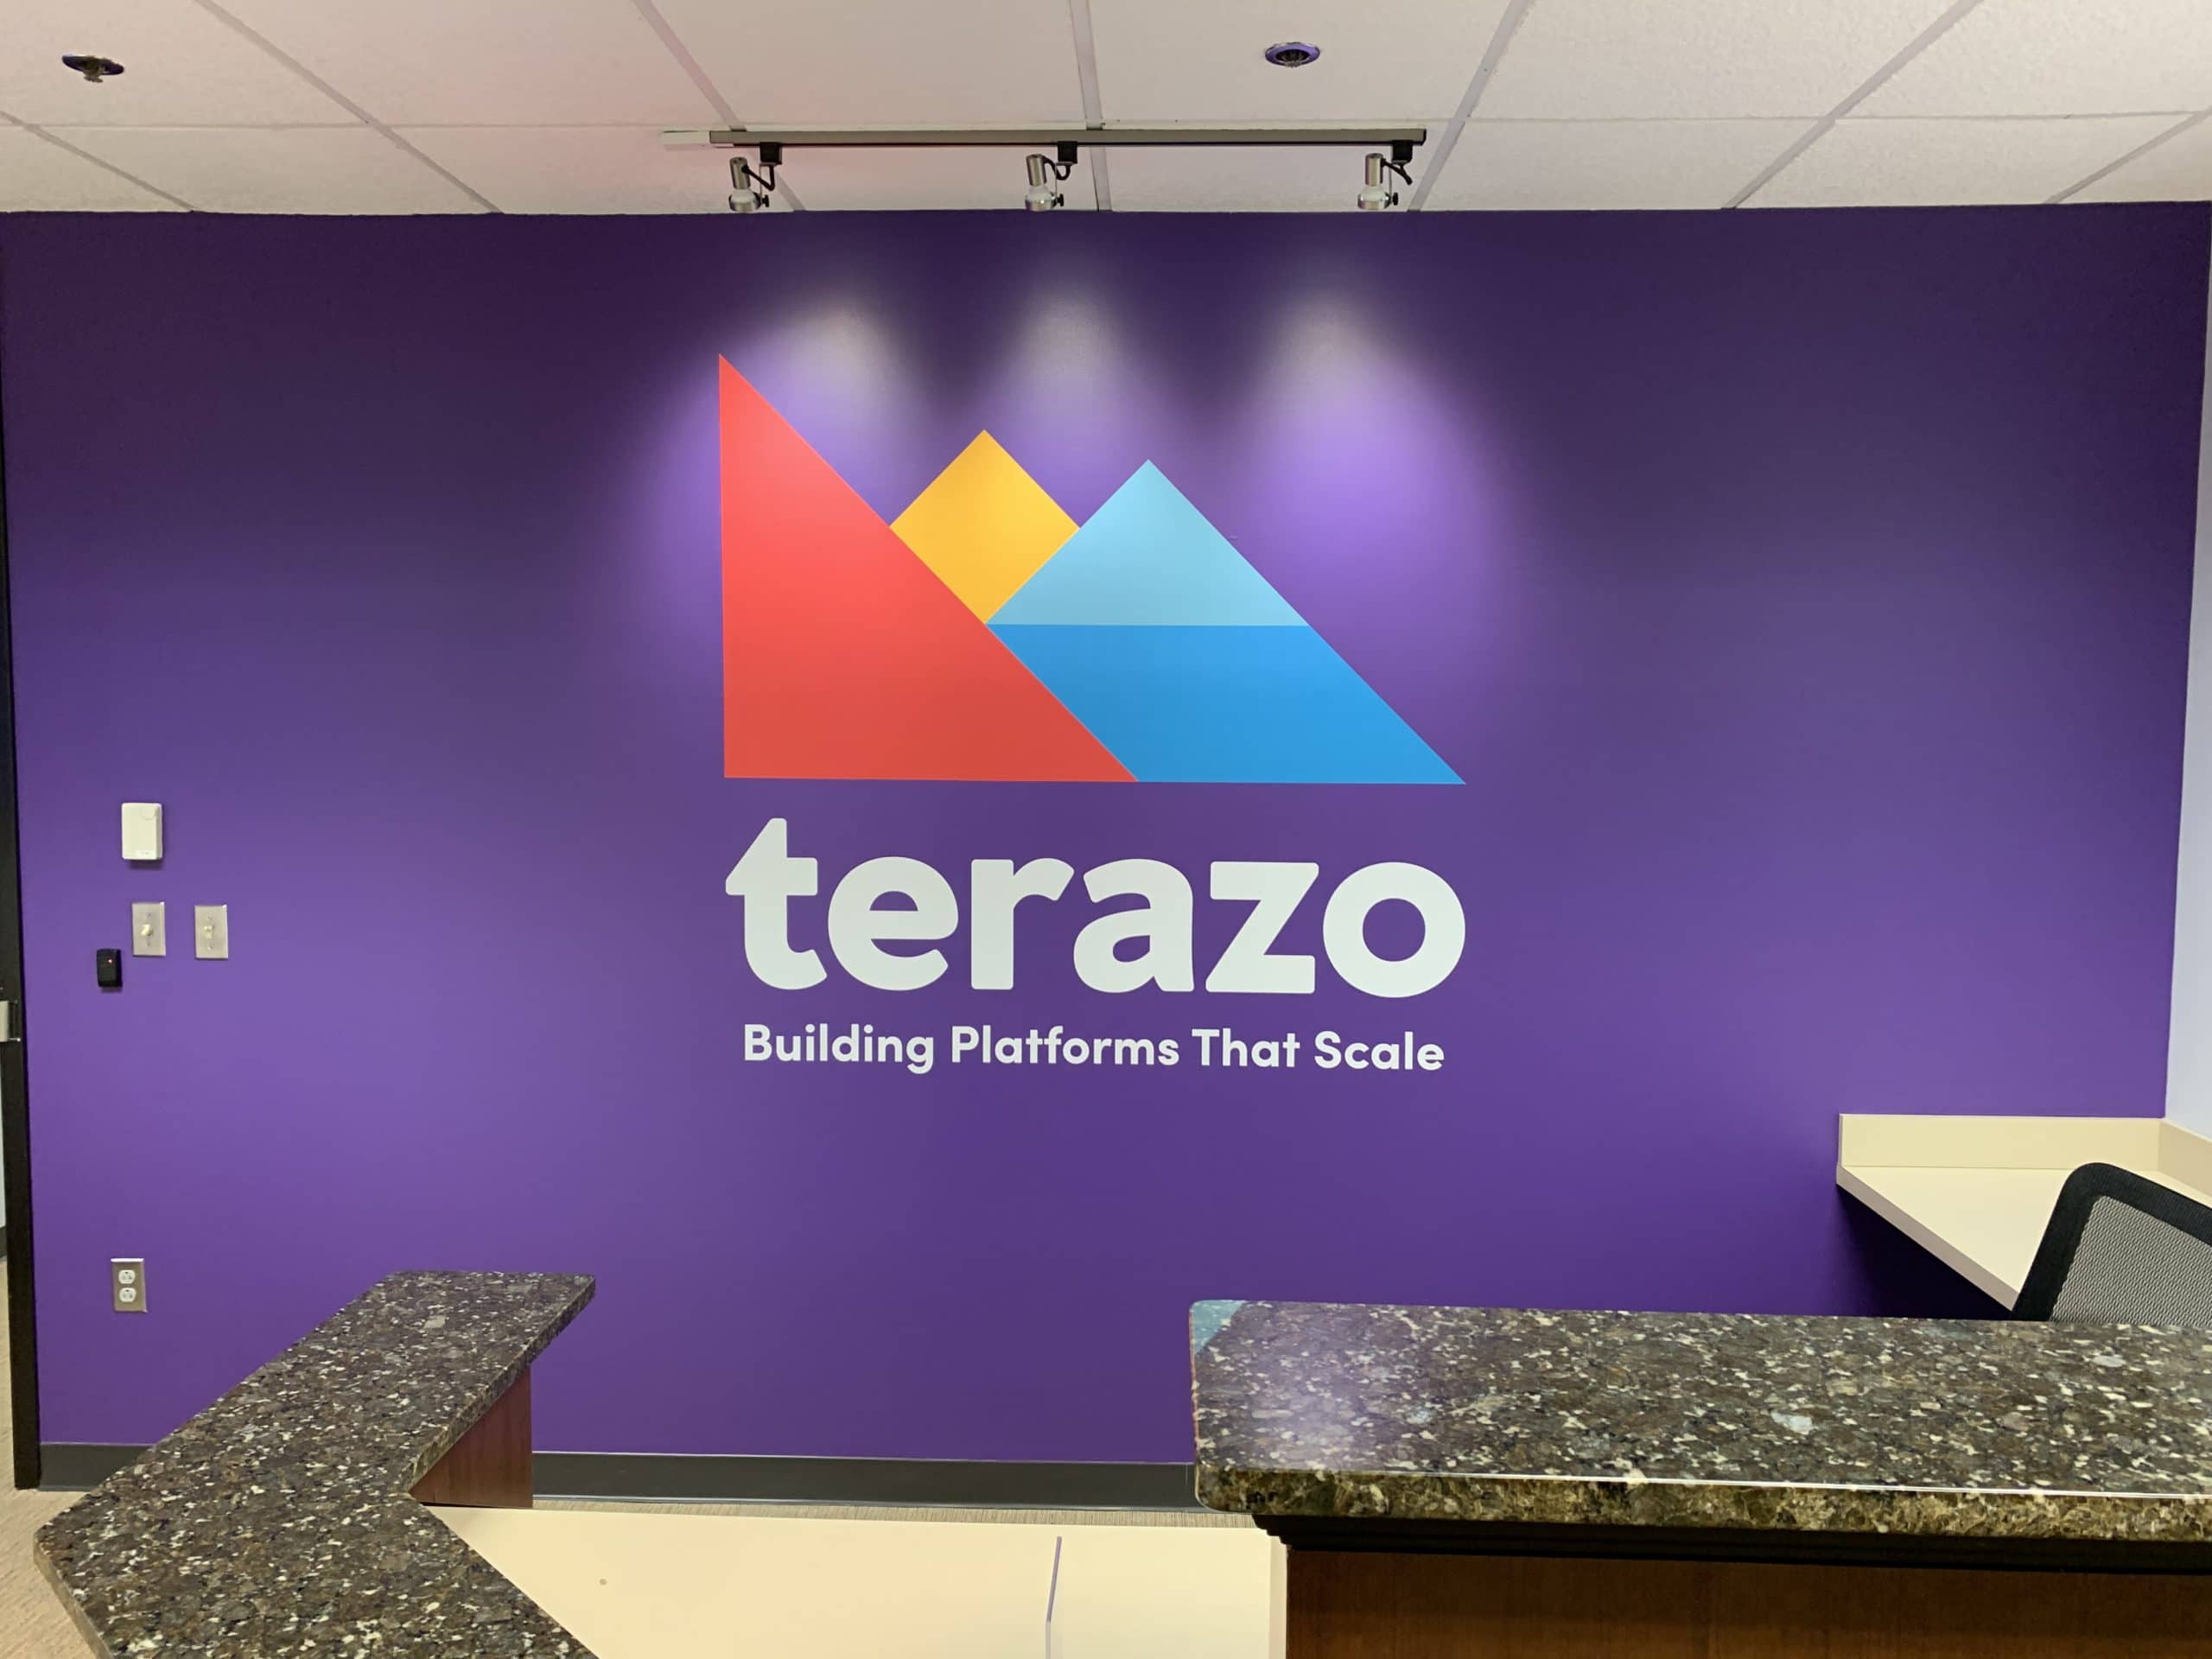 Terazo is the new name of expanding Henrico software and managed services company